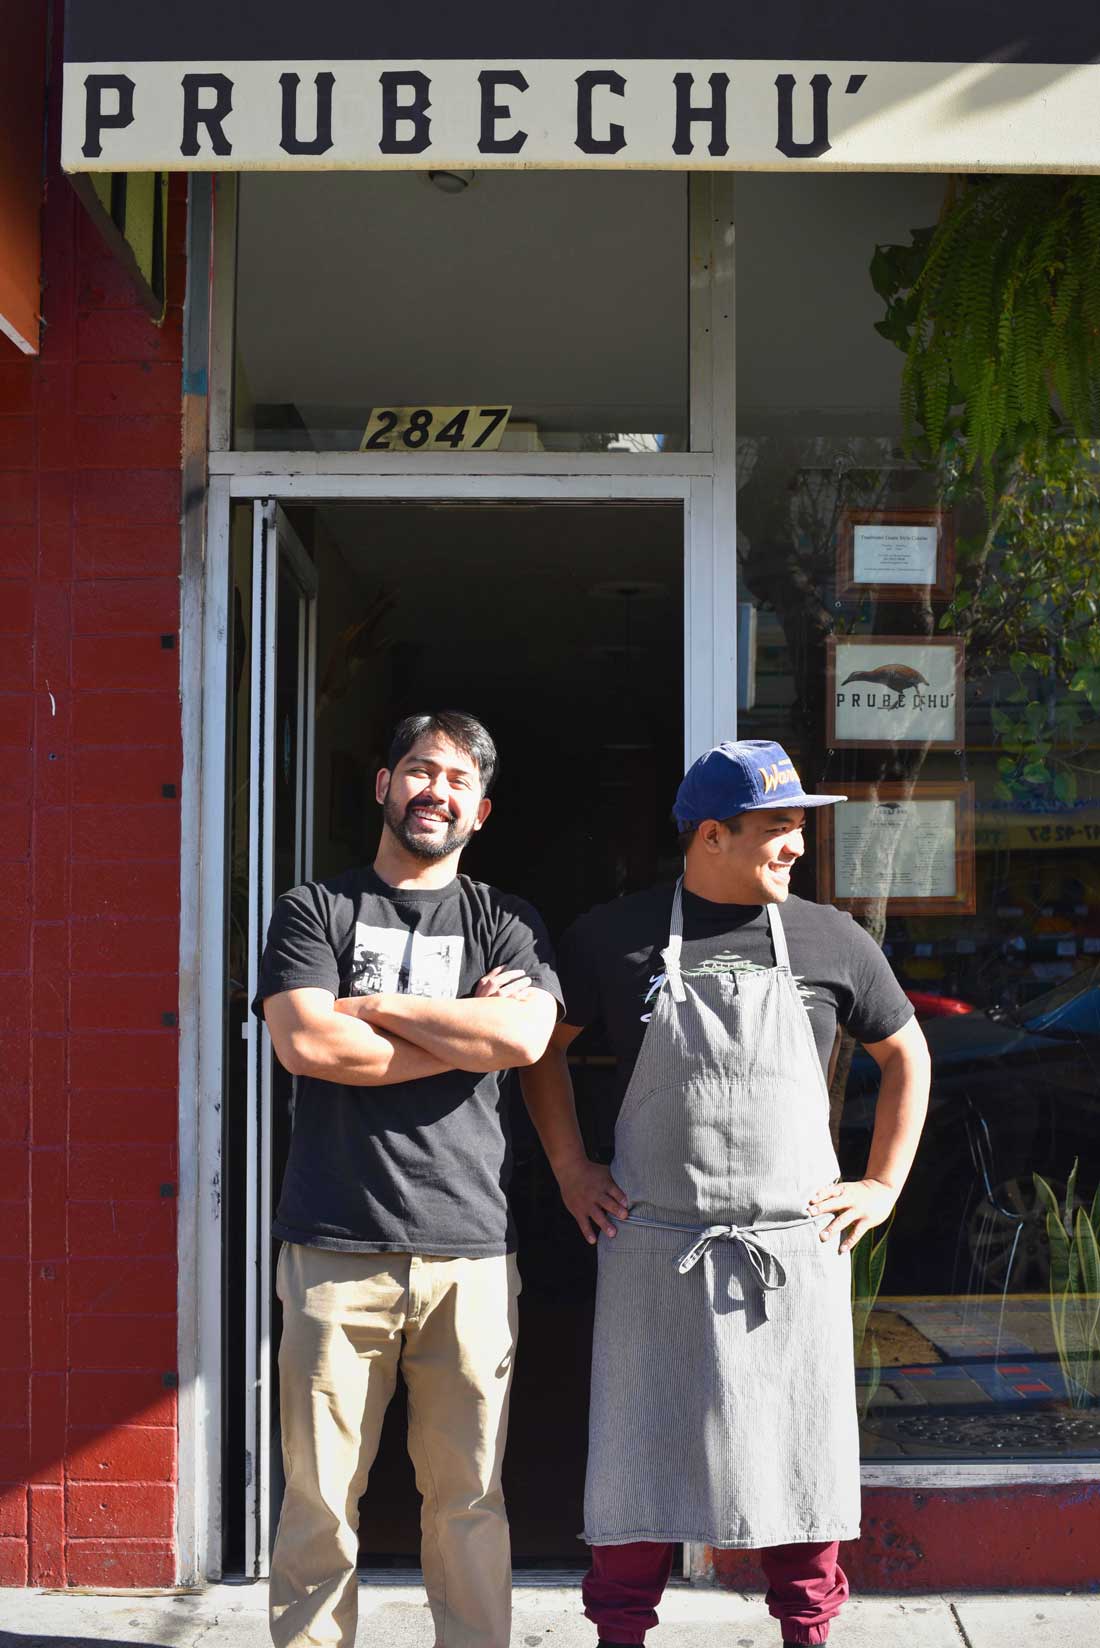 Chef Shawn Naputi and Shawn Camacho stand in front of their restaurant on San Francisco's Mission Street.